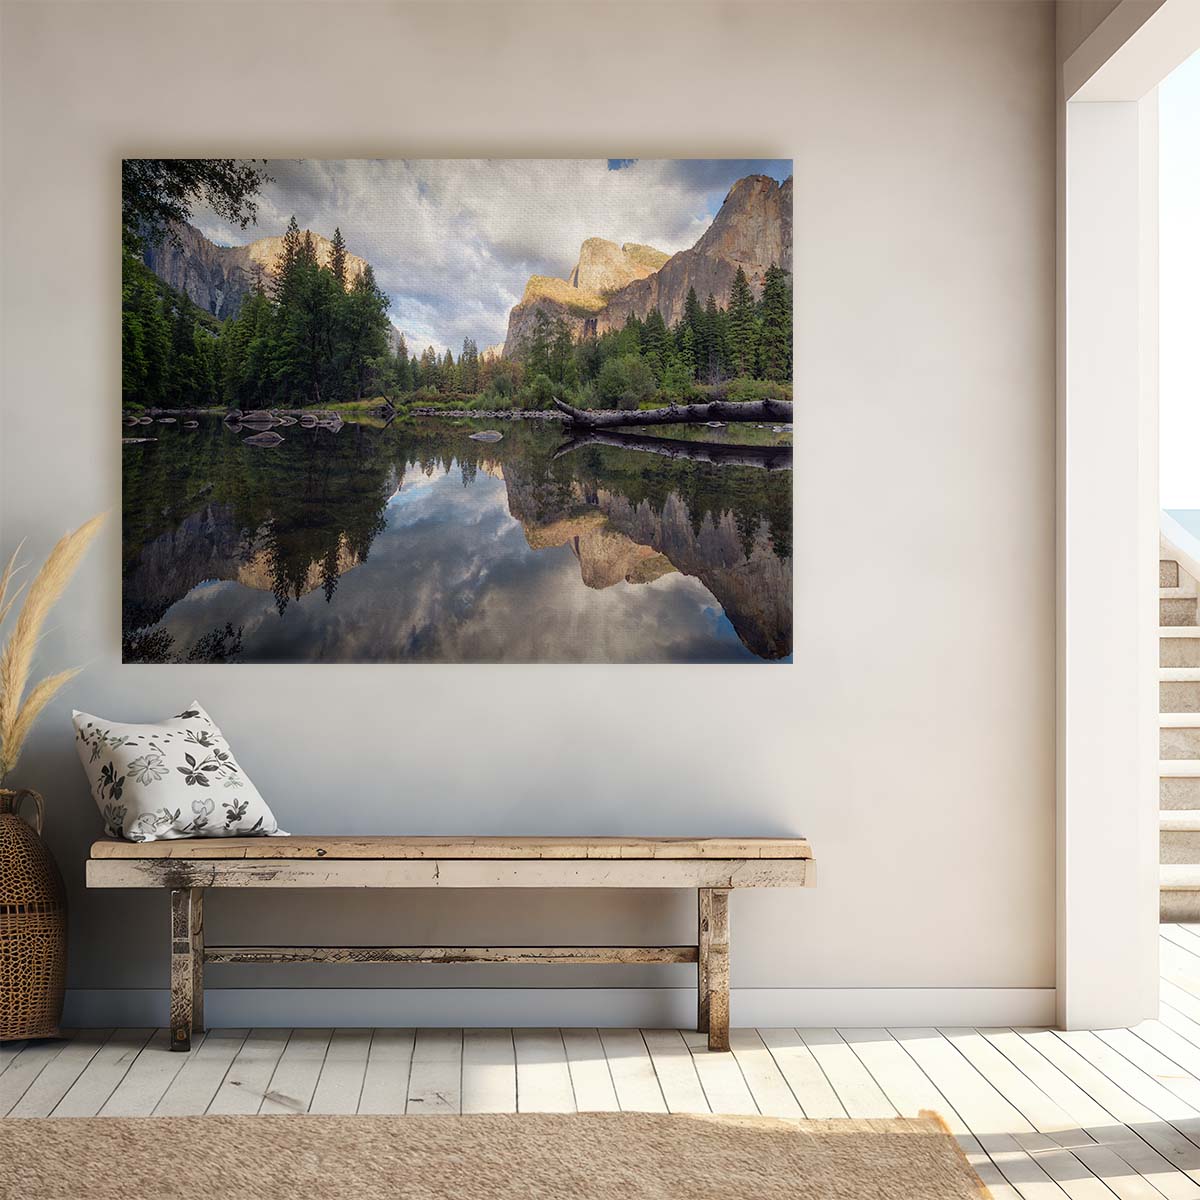 Yosemite Valley Sunrise Reflection Wall Art by Luxuriance Designs. Made in USA.